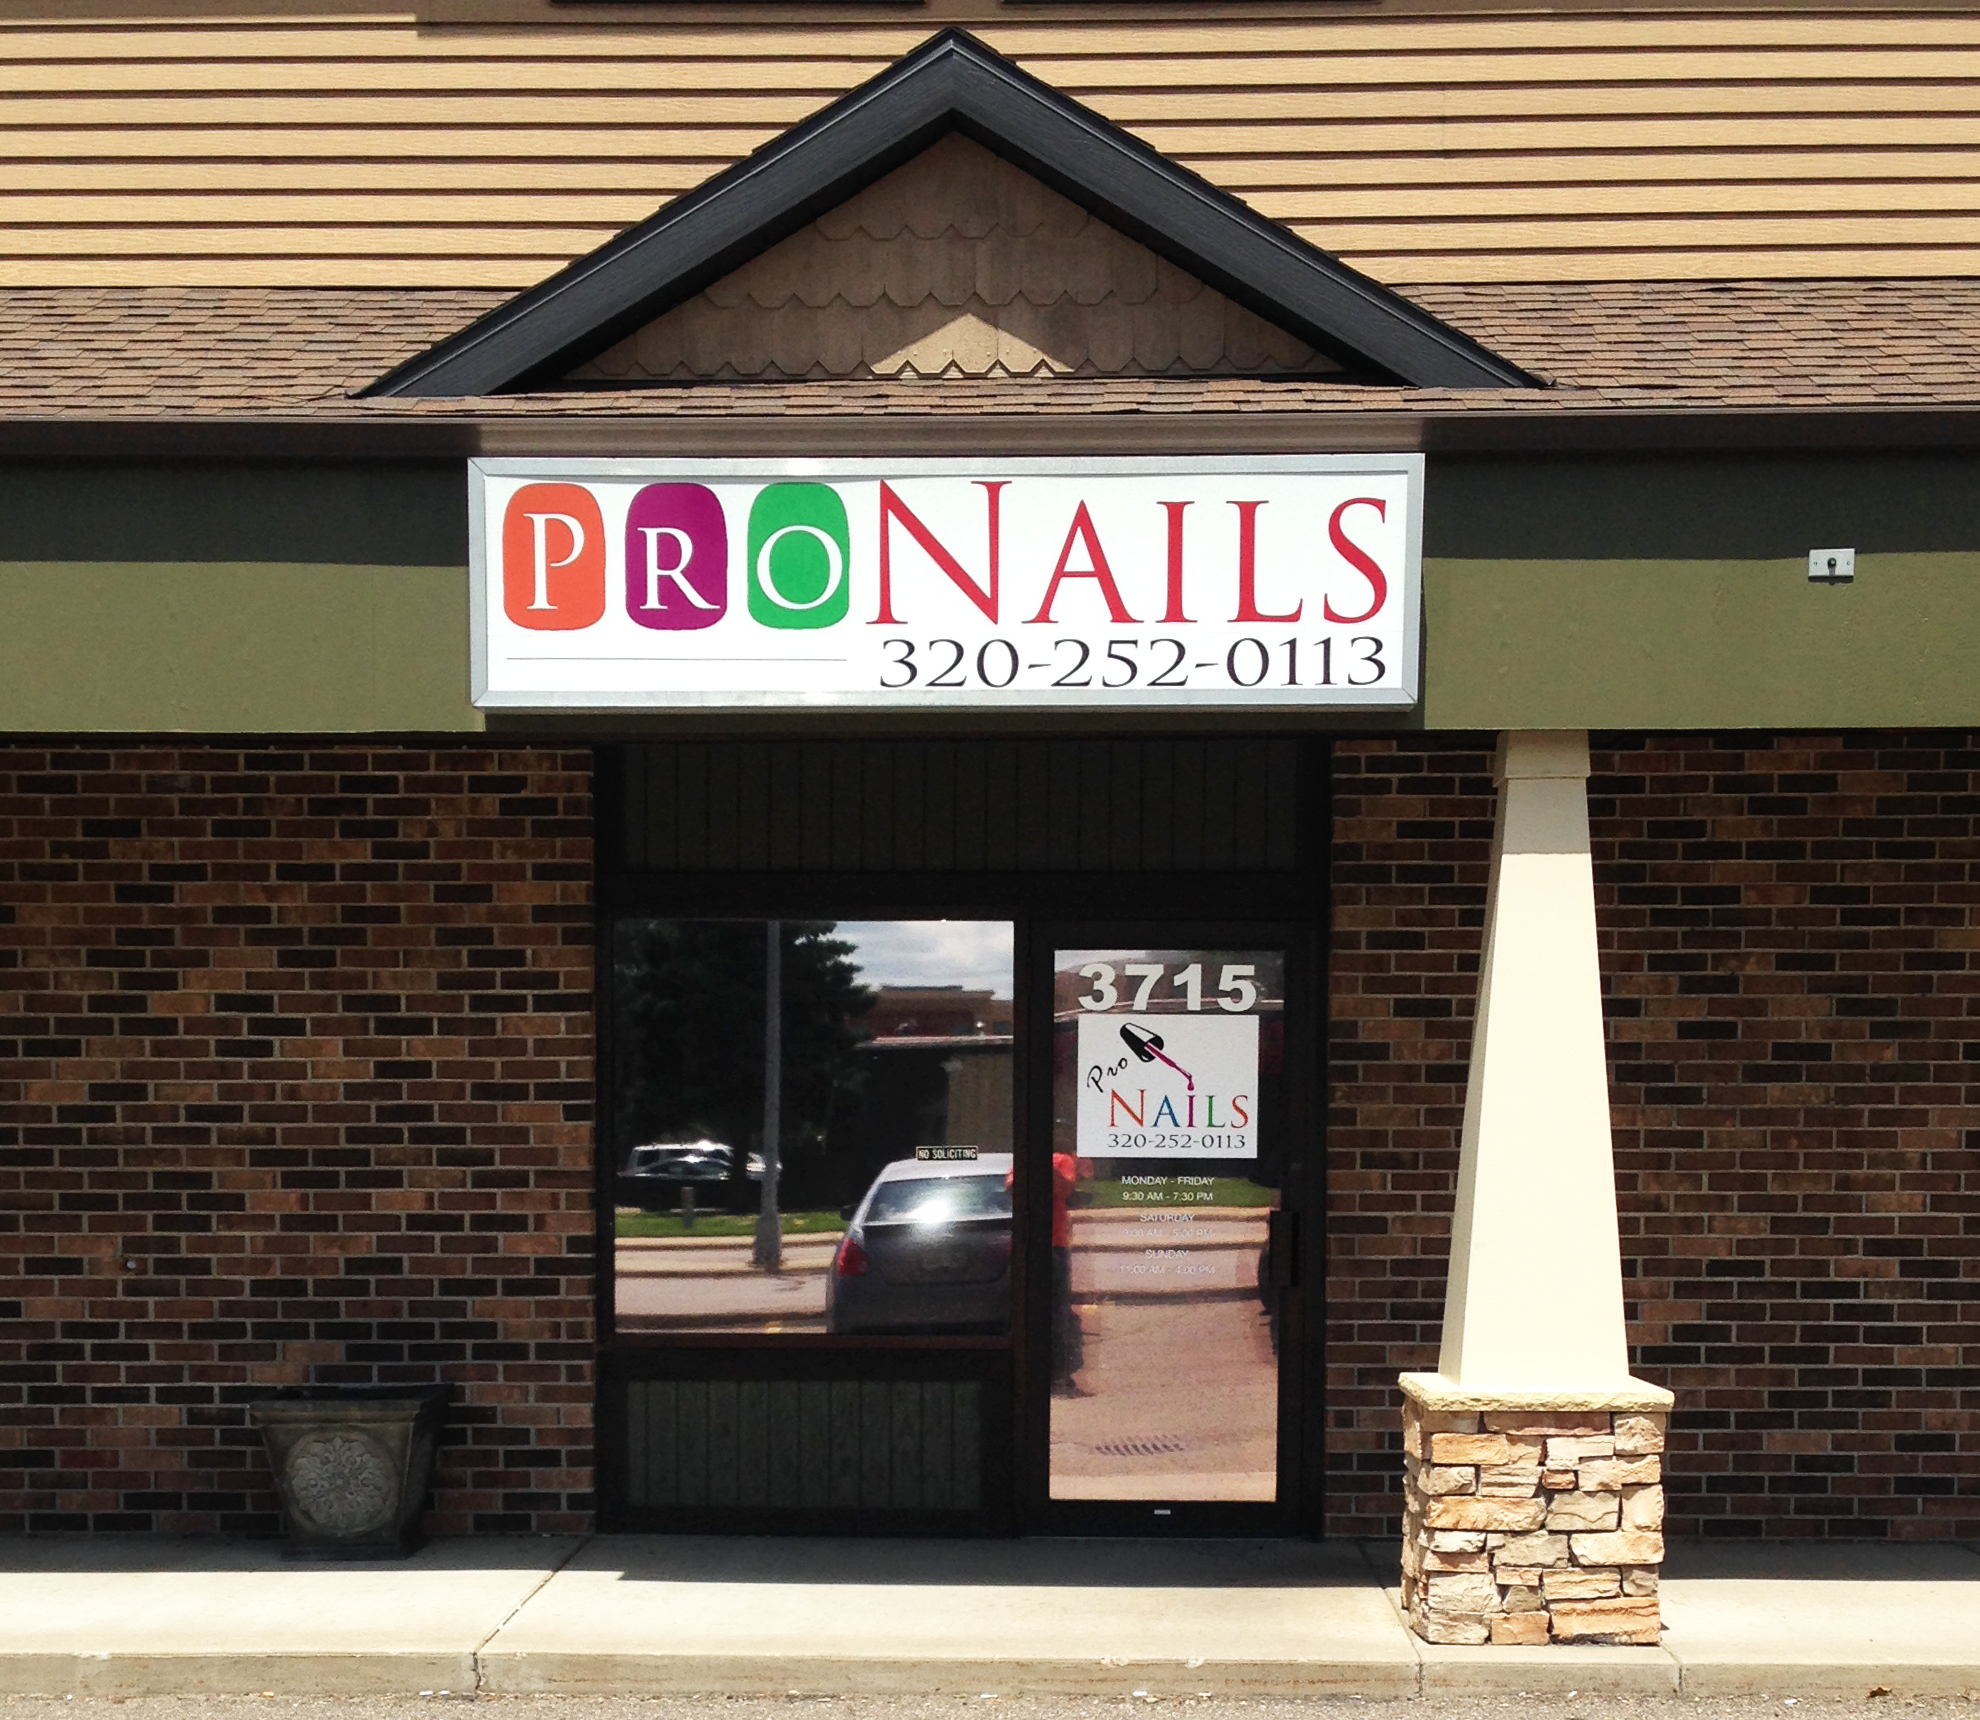 Custom Exterior Business Signage from SignMax